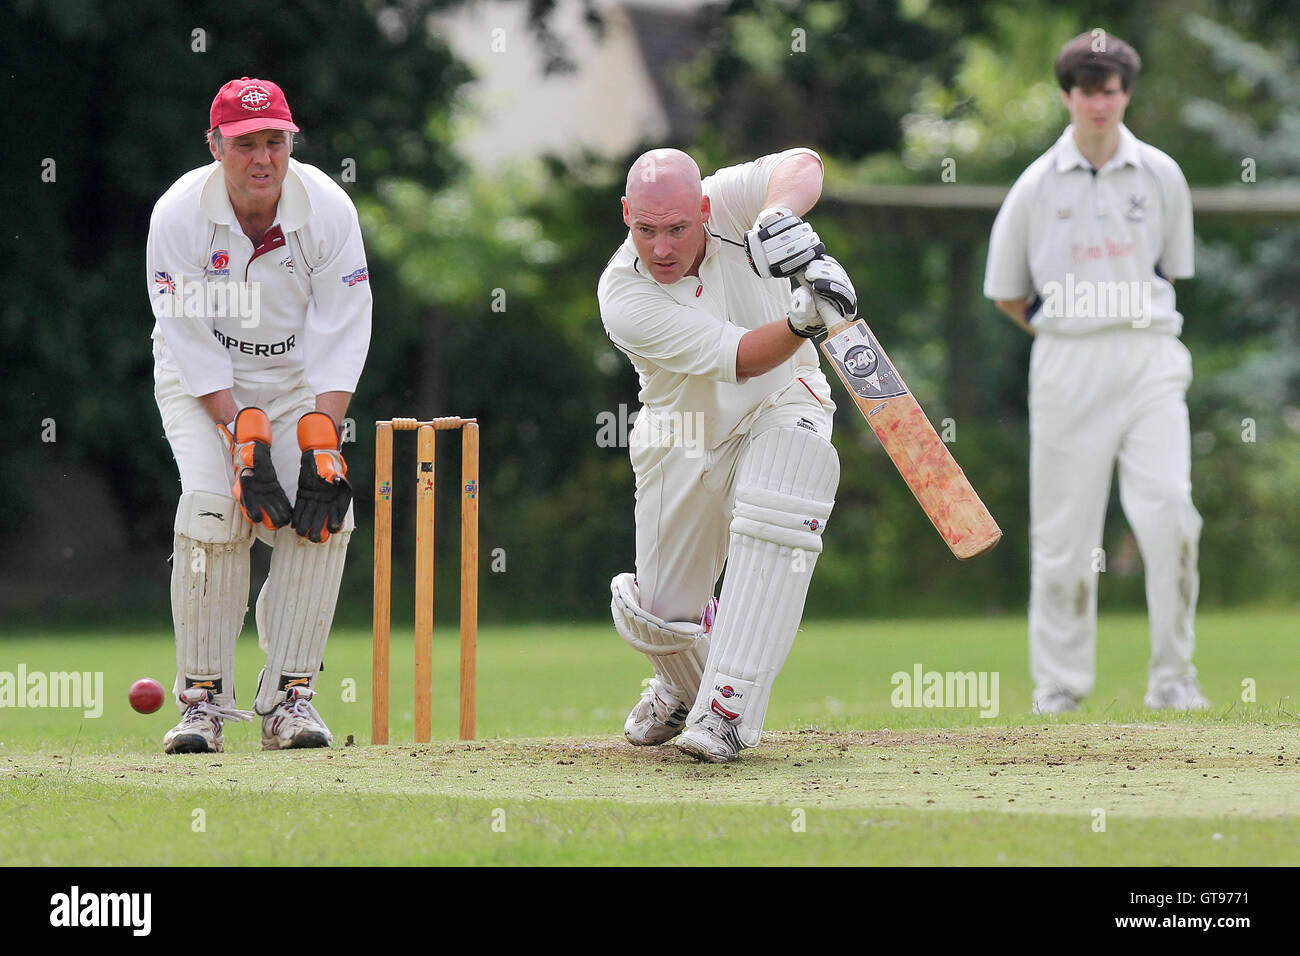 Danny Jones in batting action for Hornchurch - Hornchurch CC 5th XI vs Upminster CC 6th XI - Essex Cricket League at Met Police Sports Ground, Chigwell - 25/06/11 Stock Photo